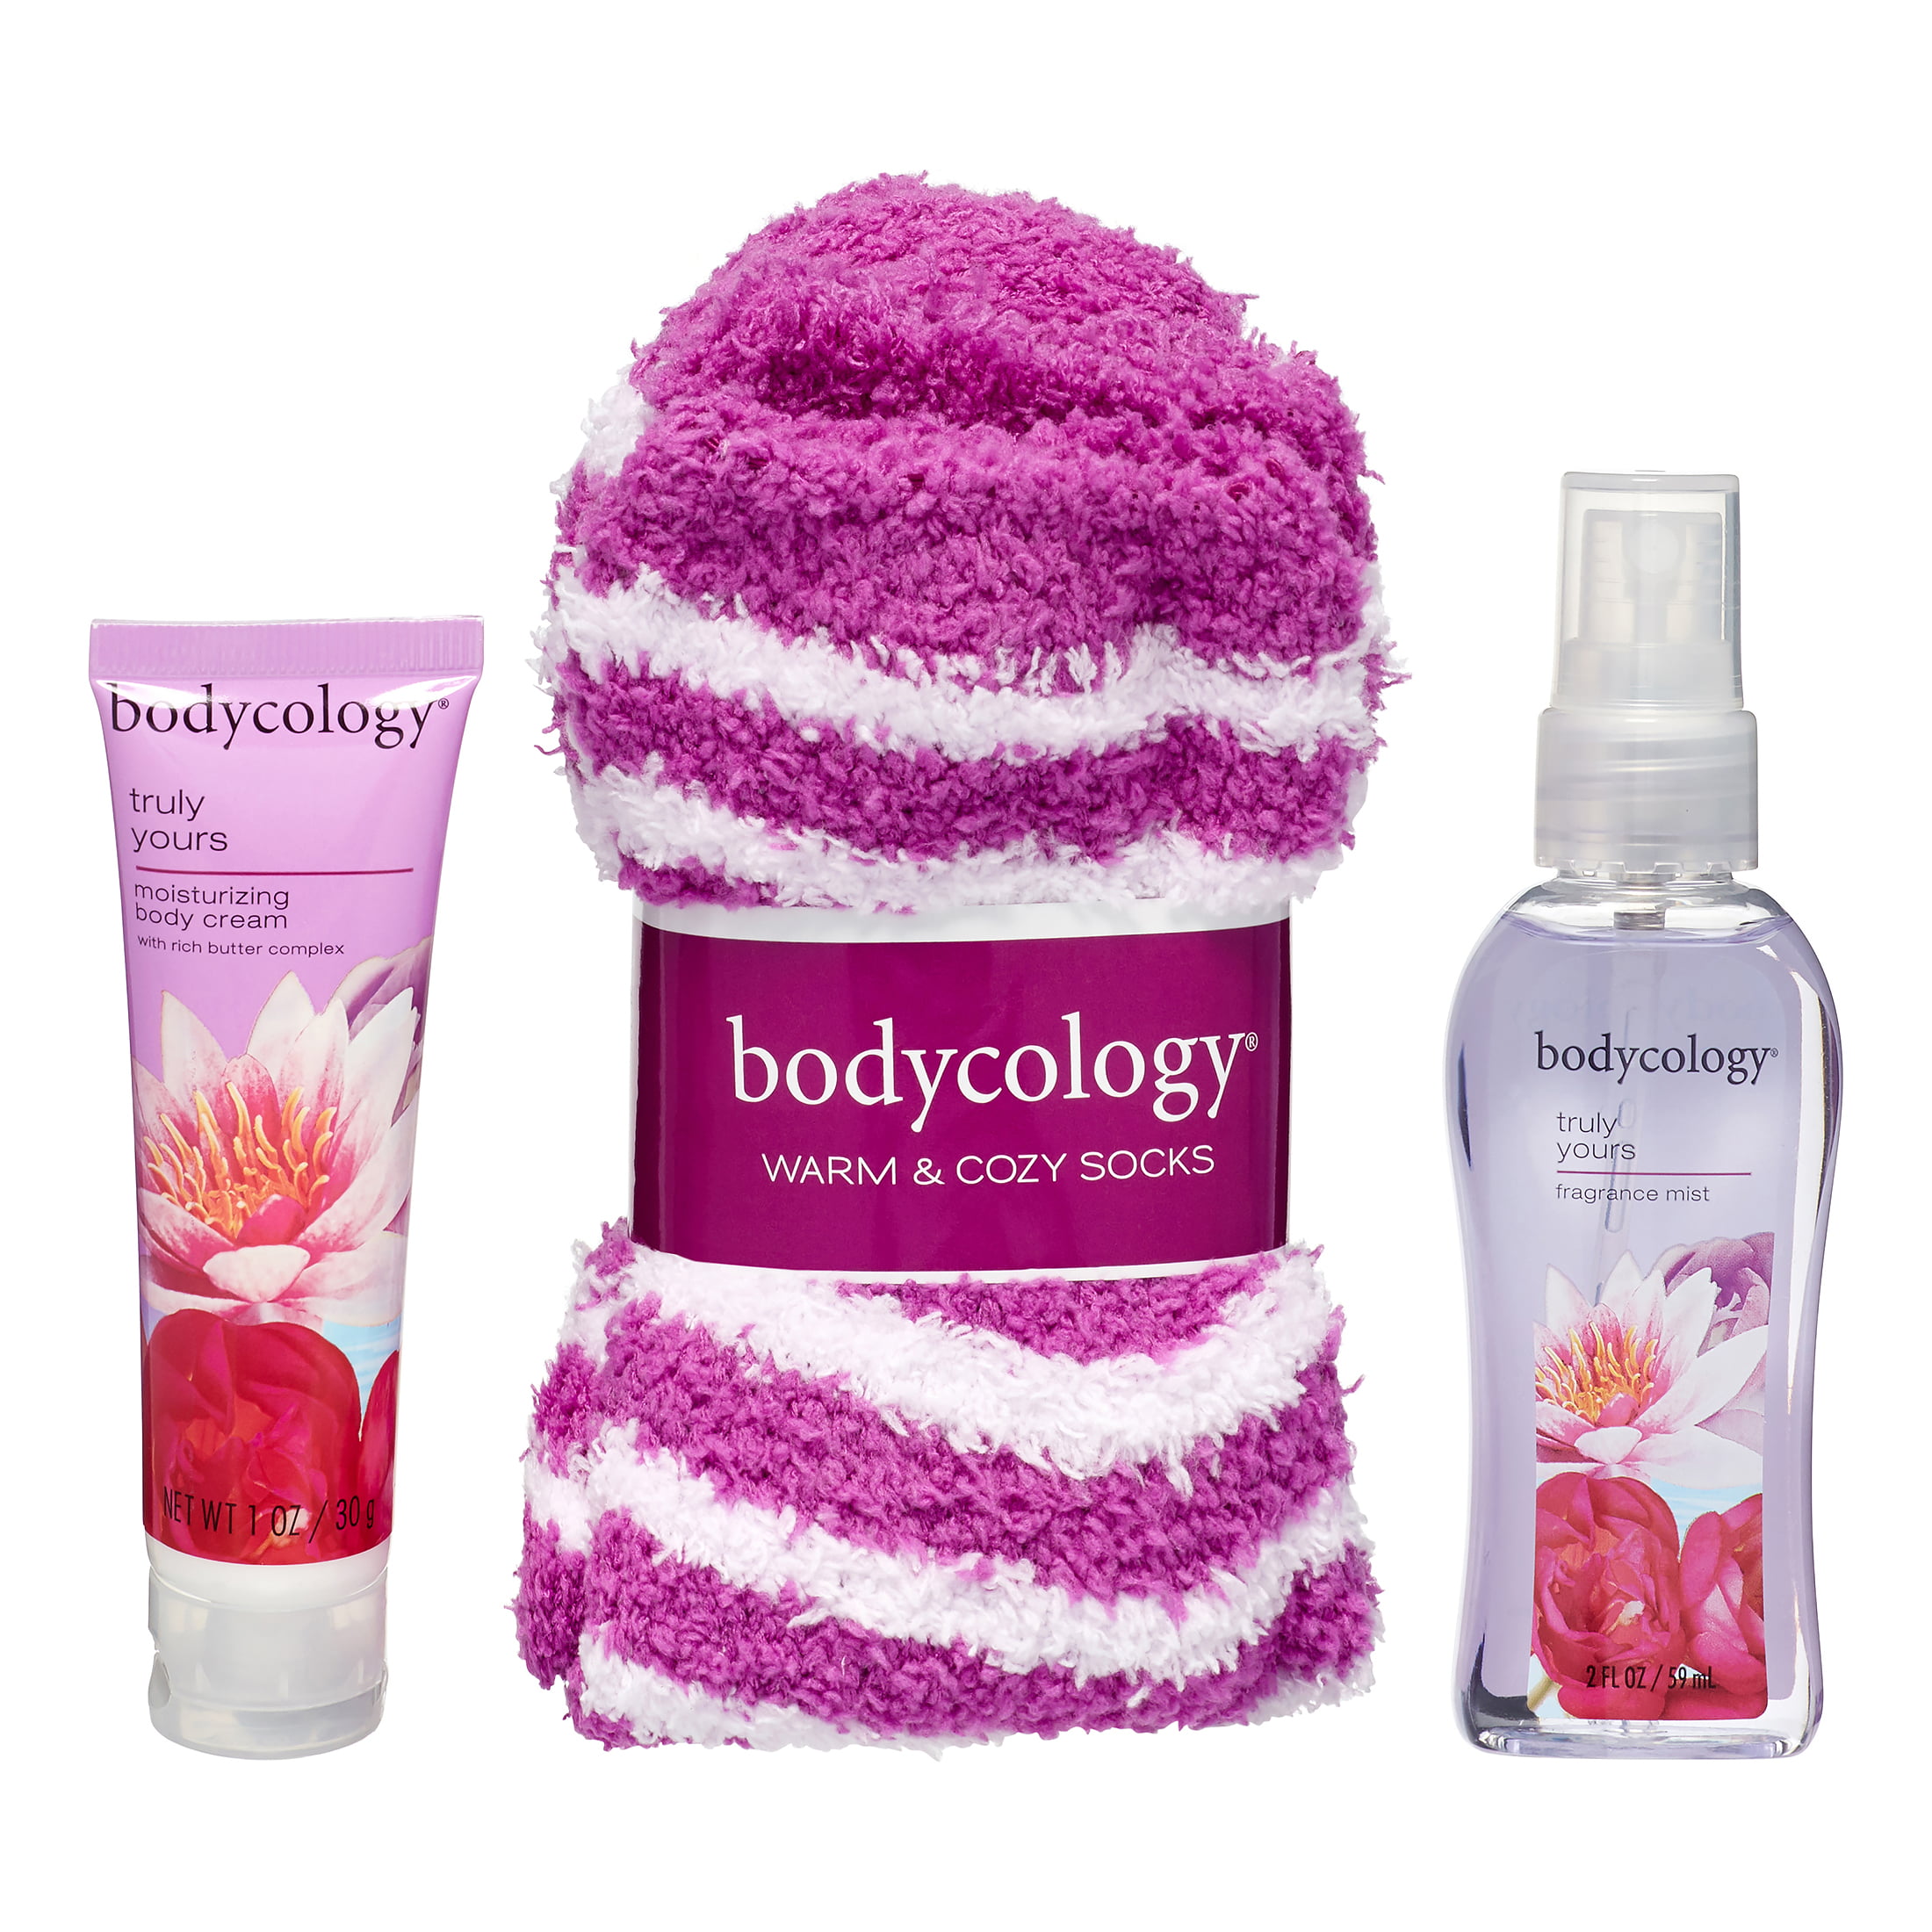 Bodycology Truly Yours Gift Set with Warm Socks, 3 Pieces - Walmart.com